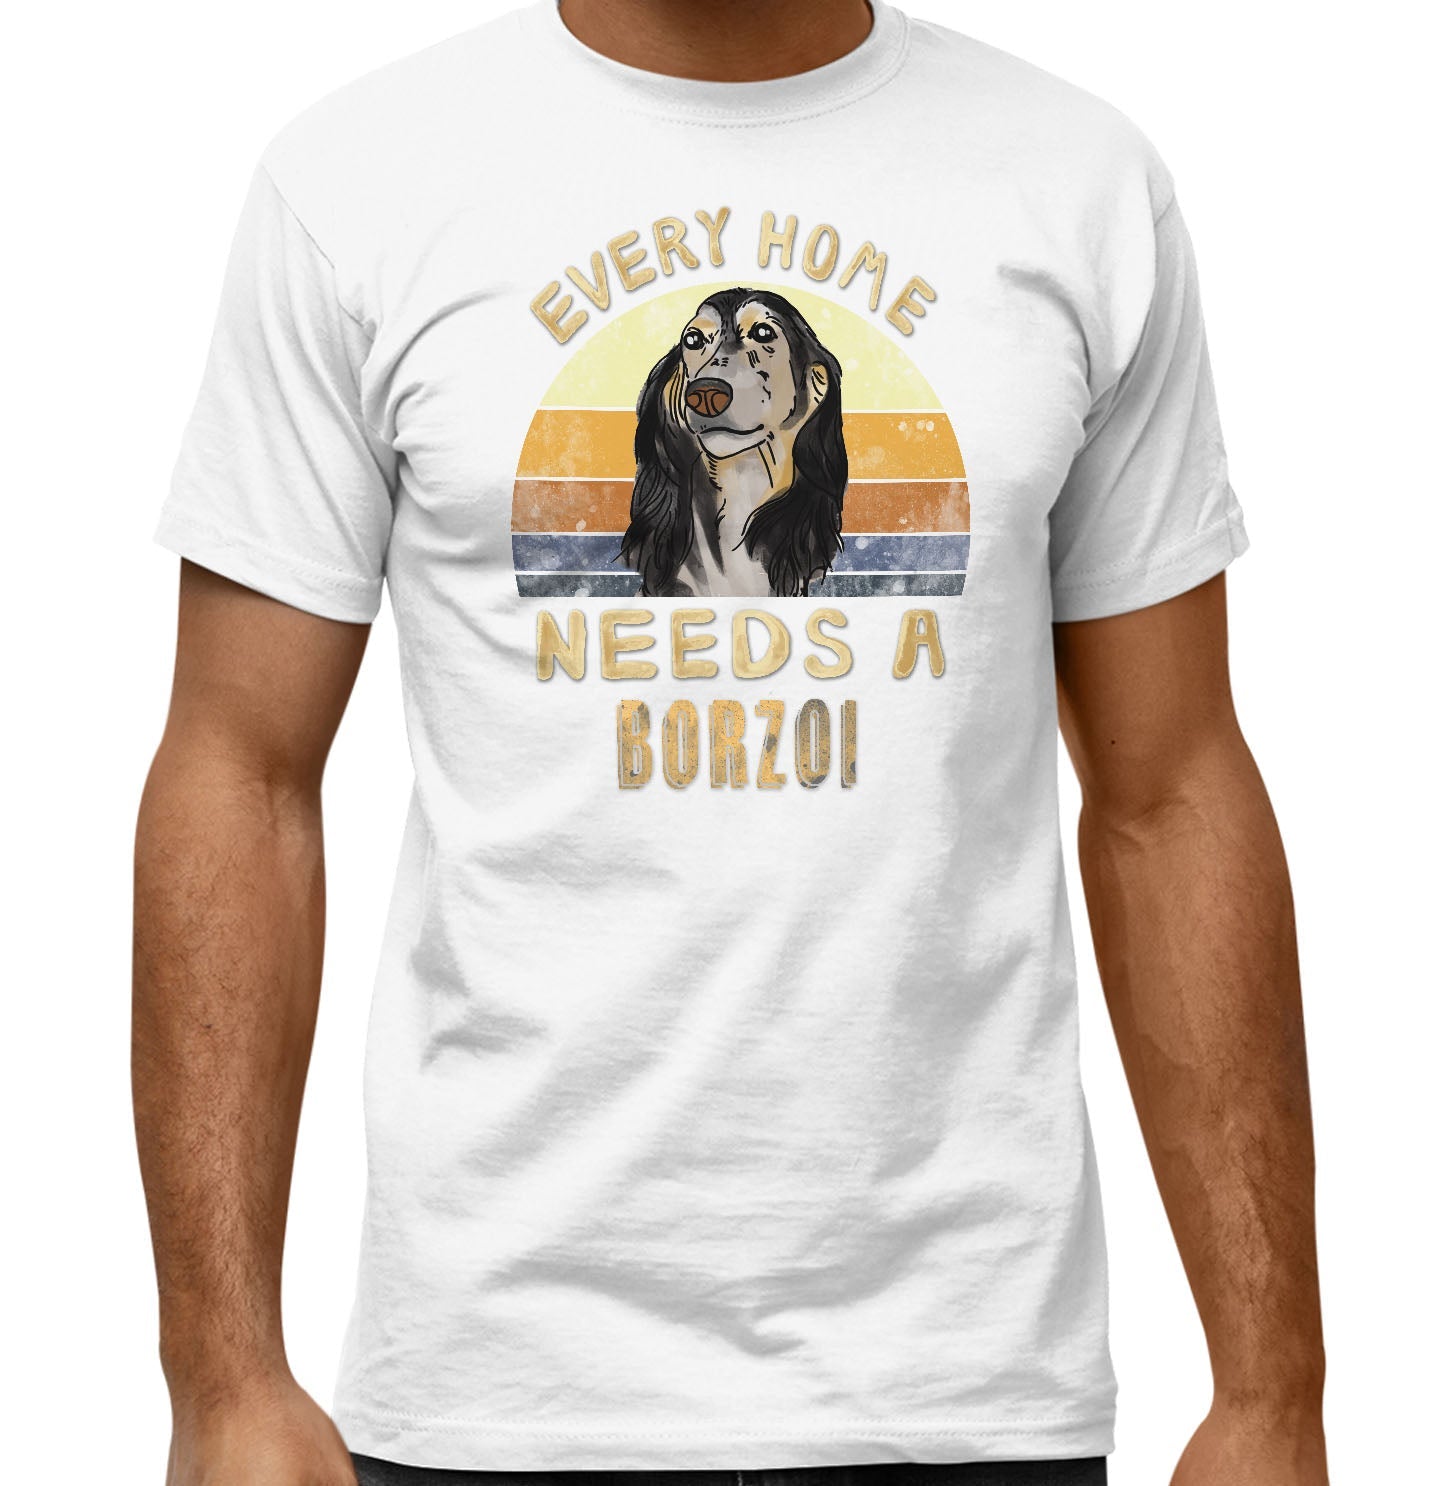 Every Home Needs a Borzoi - Adult Unisex T-Shirt